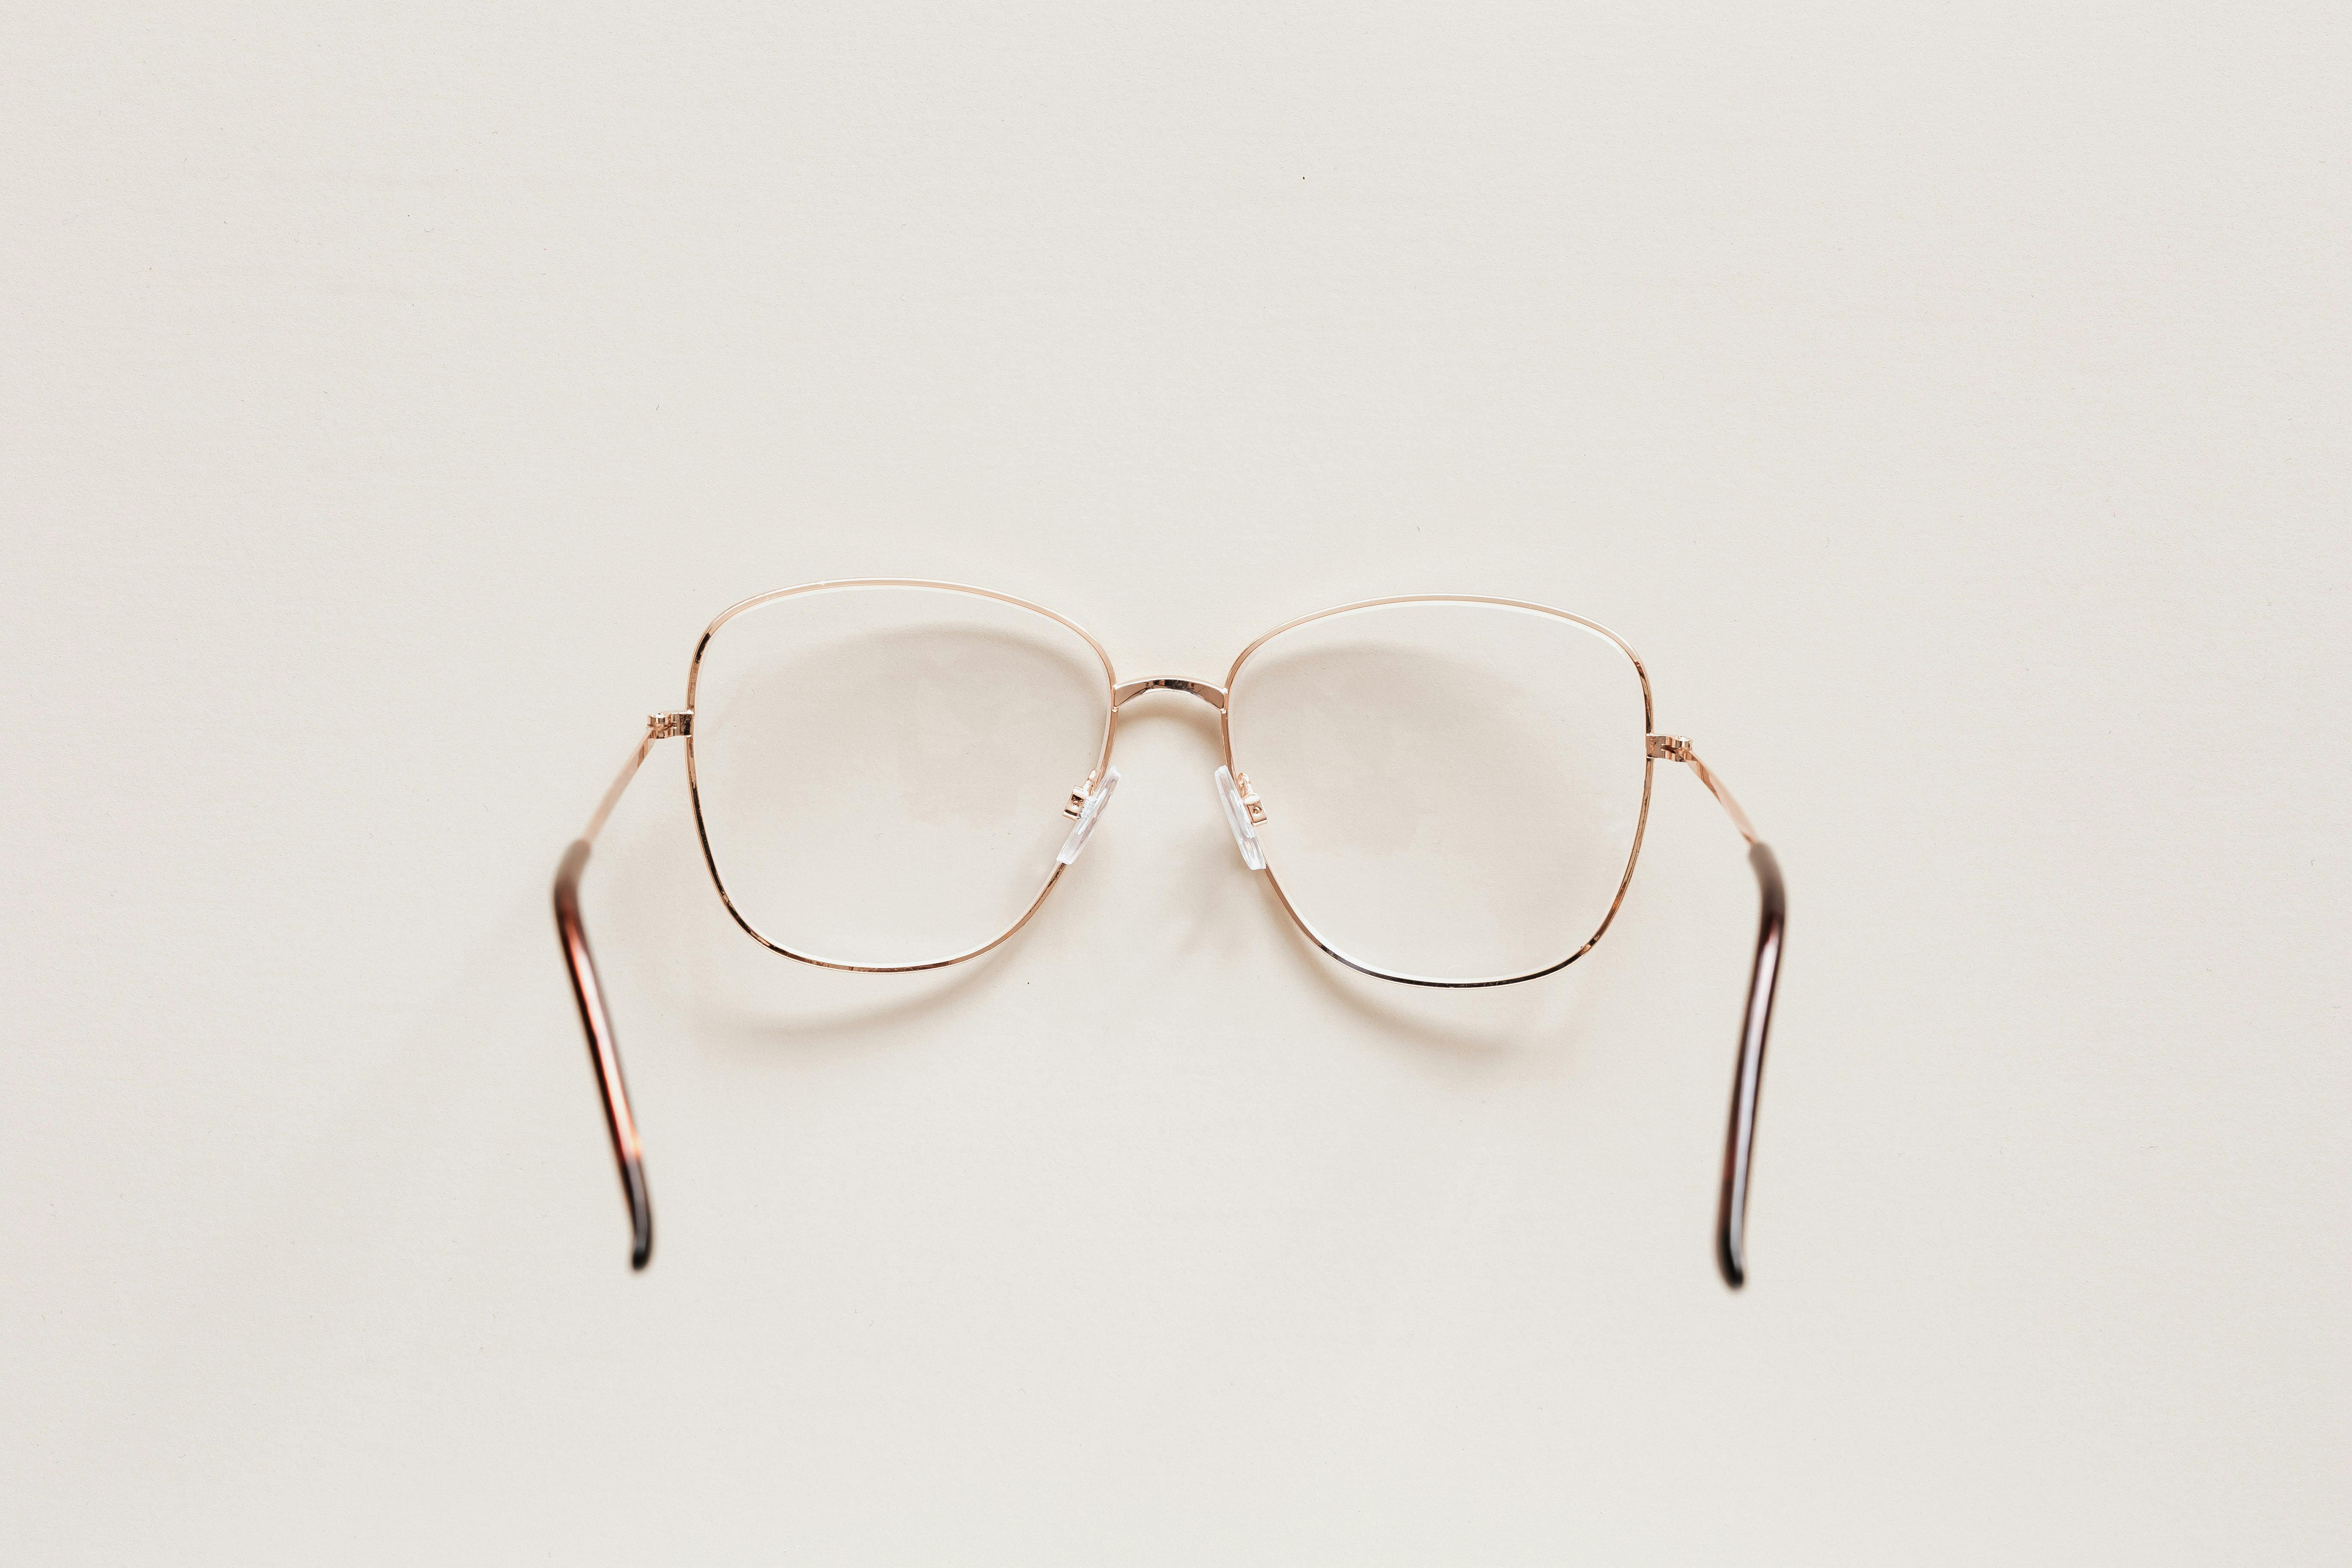 Top view of fashion spectacles with transparent optical lenses in golden metal shell placed on white table